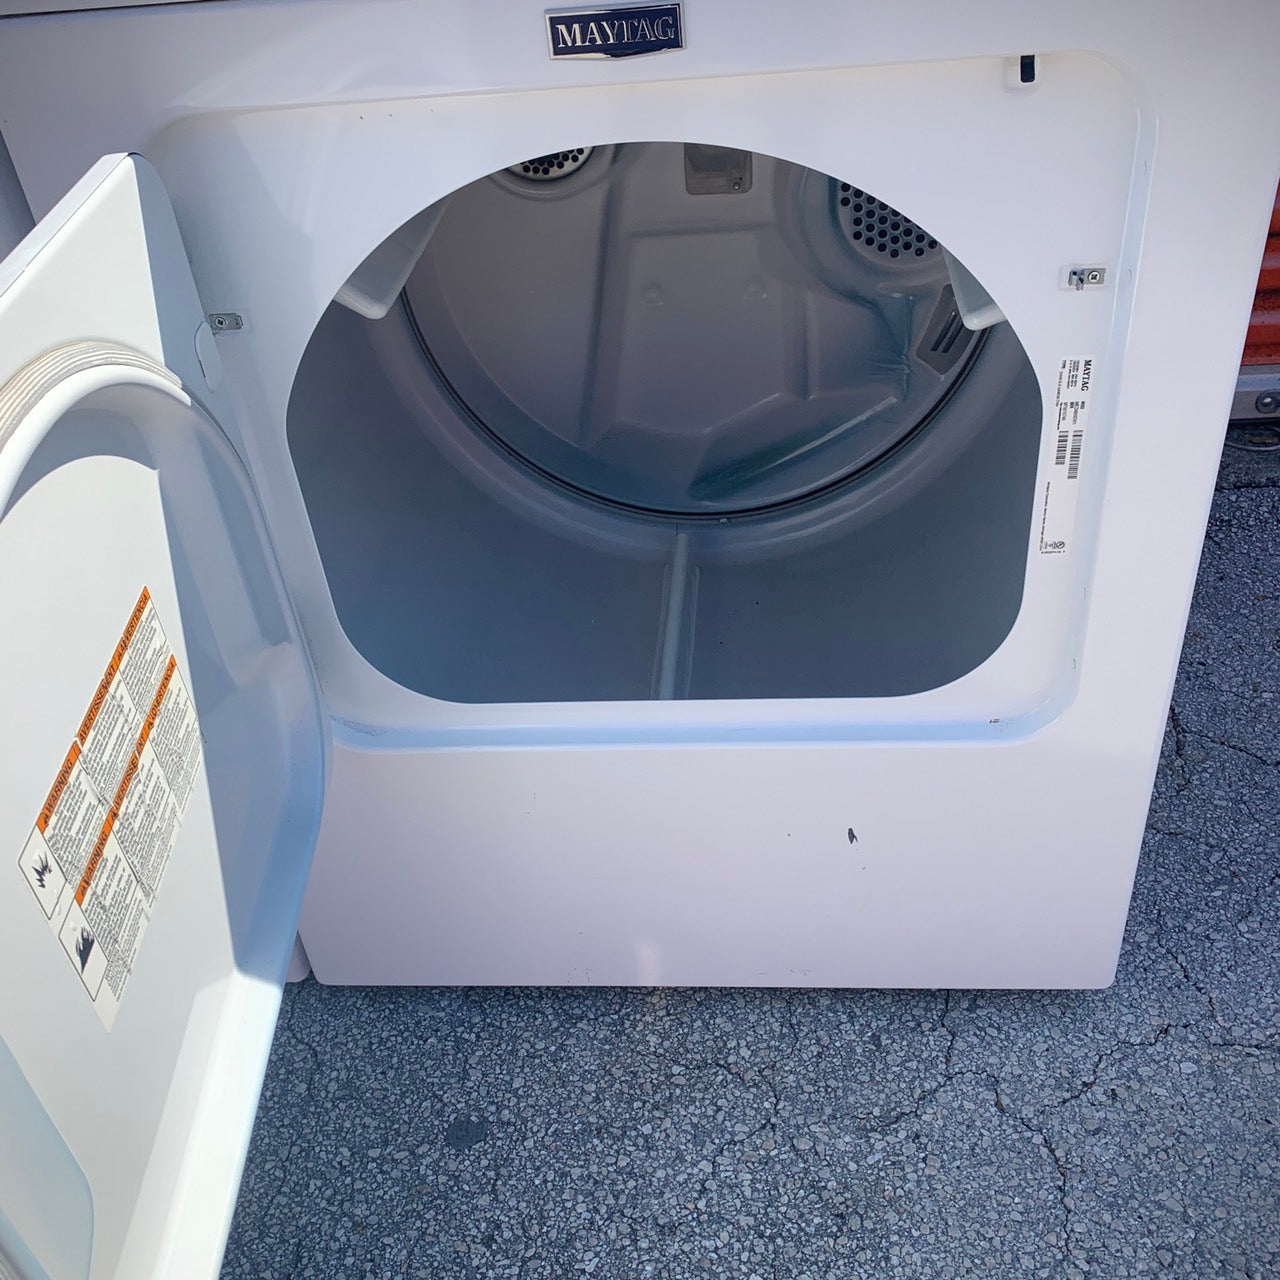 Maytag Washer and Dryer Set